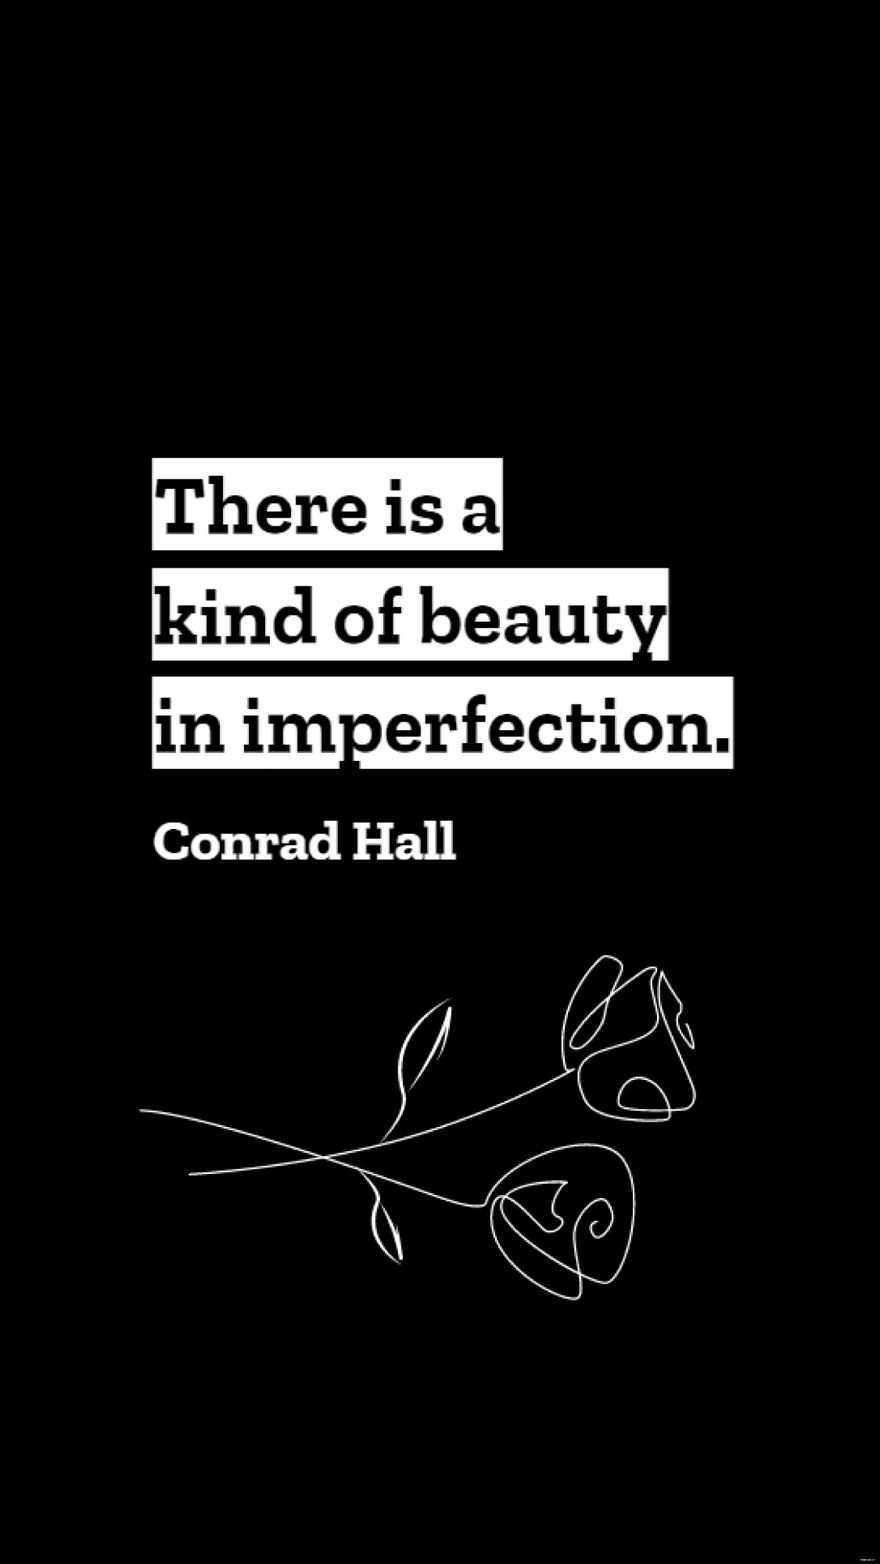 quotes about imperfection and beauty